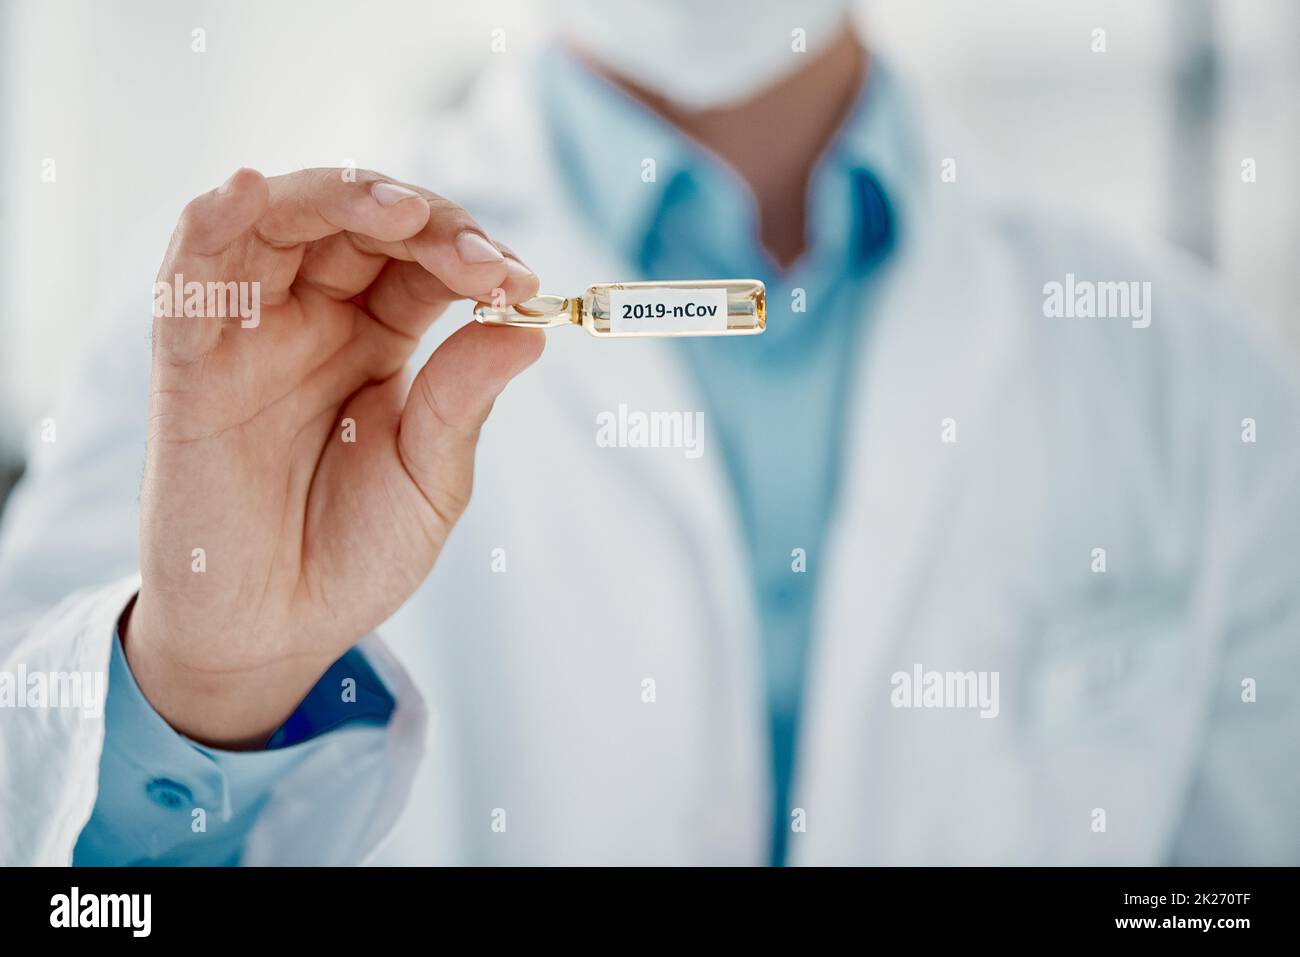 It's finally here. Cropped shot of a scientist holding an ampoule with 2019-nCov on it. Stock Photo